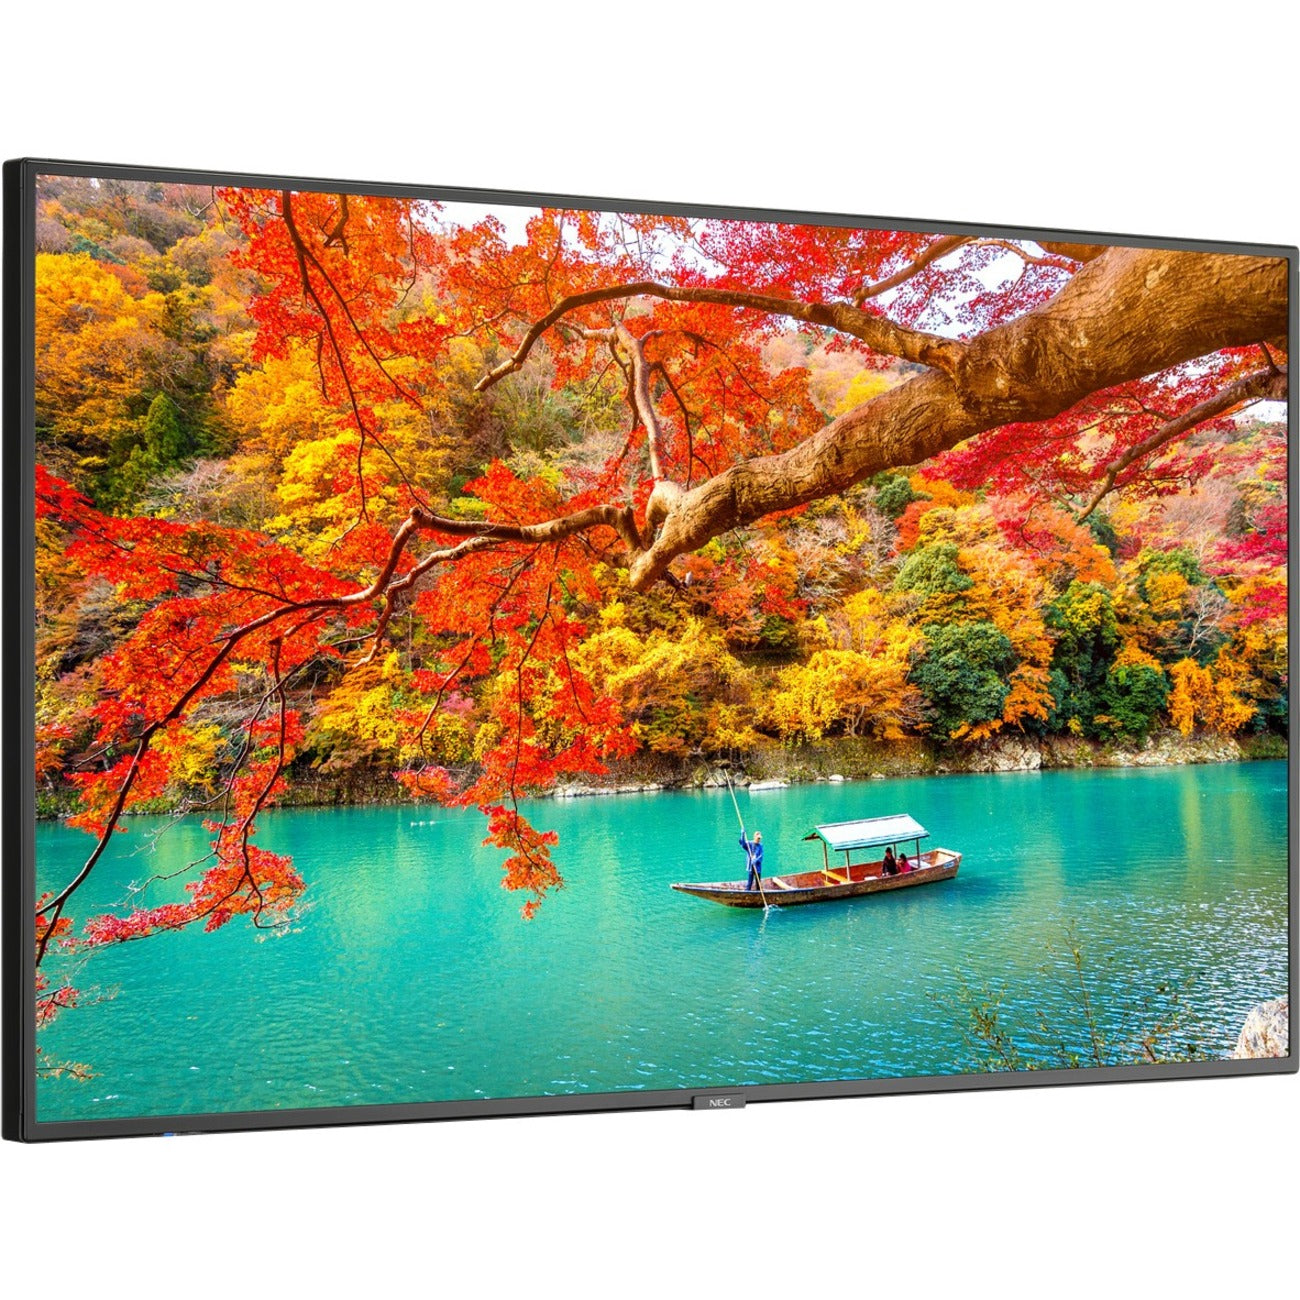 NEC Display 43" Wide Color Gamut Ultra High Definition Professional Display (MA431) Alternate-Image12 image